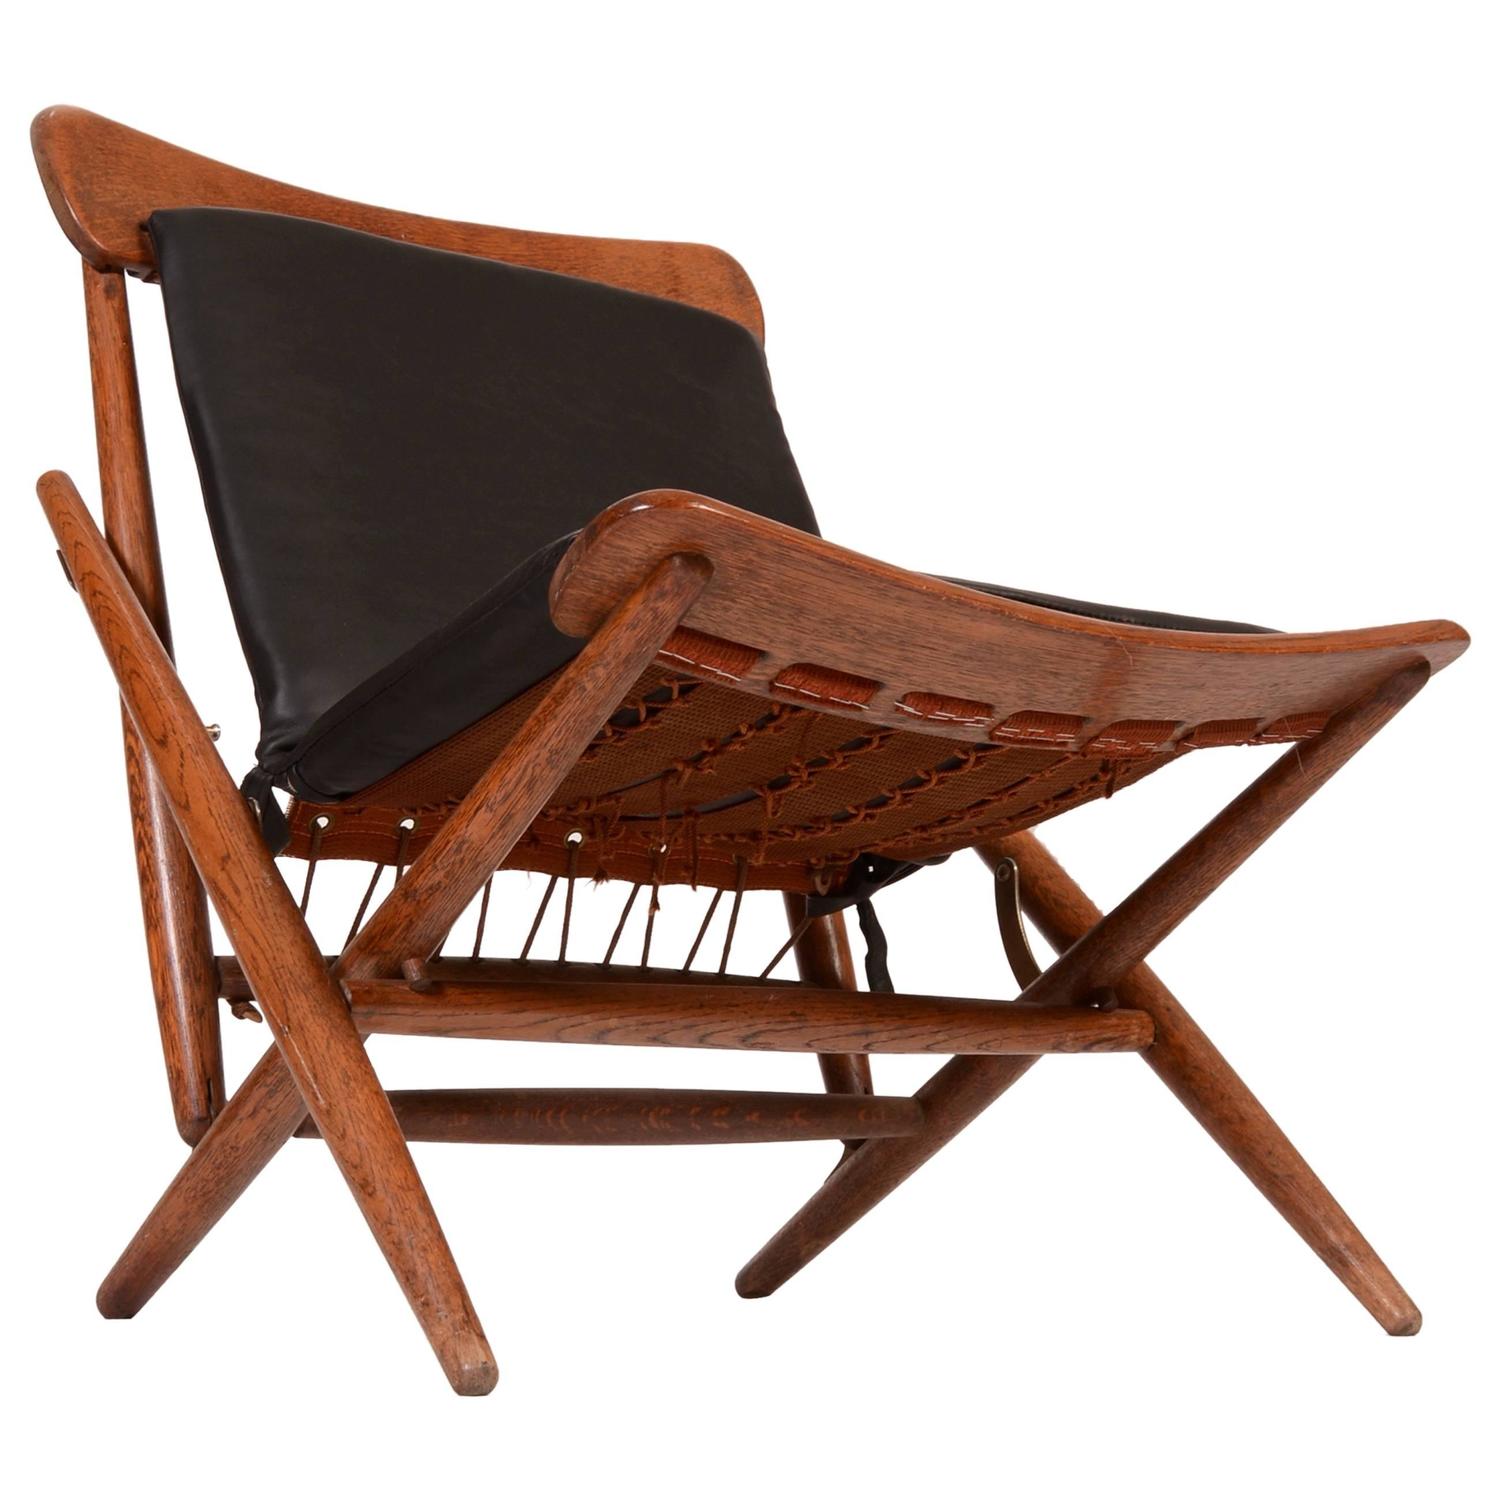 Danish Teak and Leather Folding Side Chair For Sale at 1stdibs